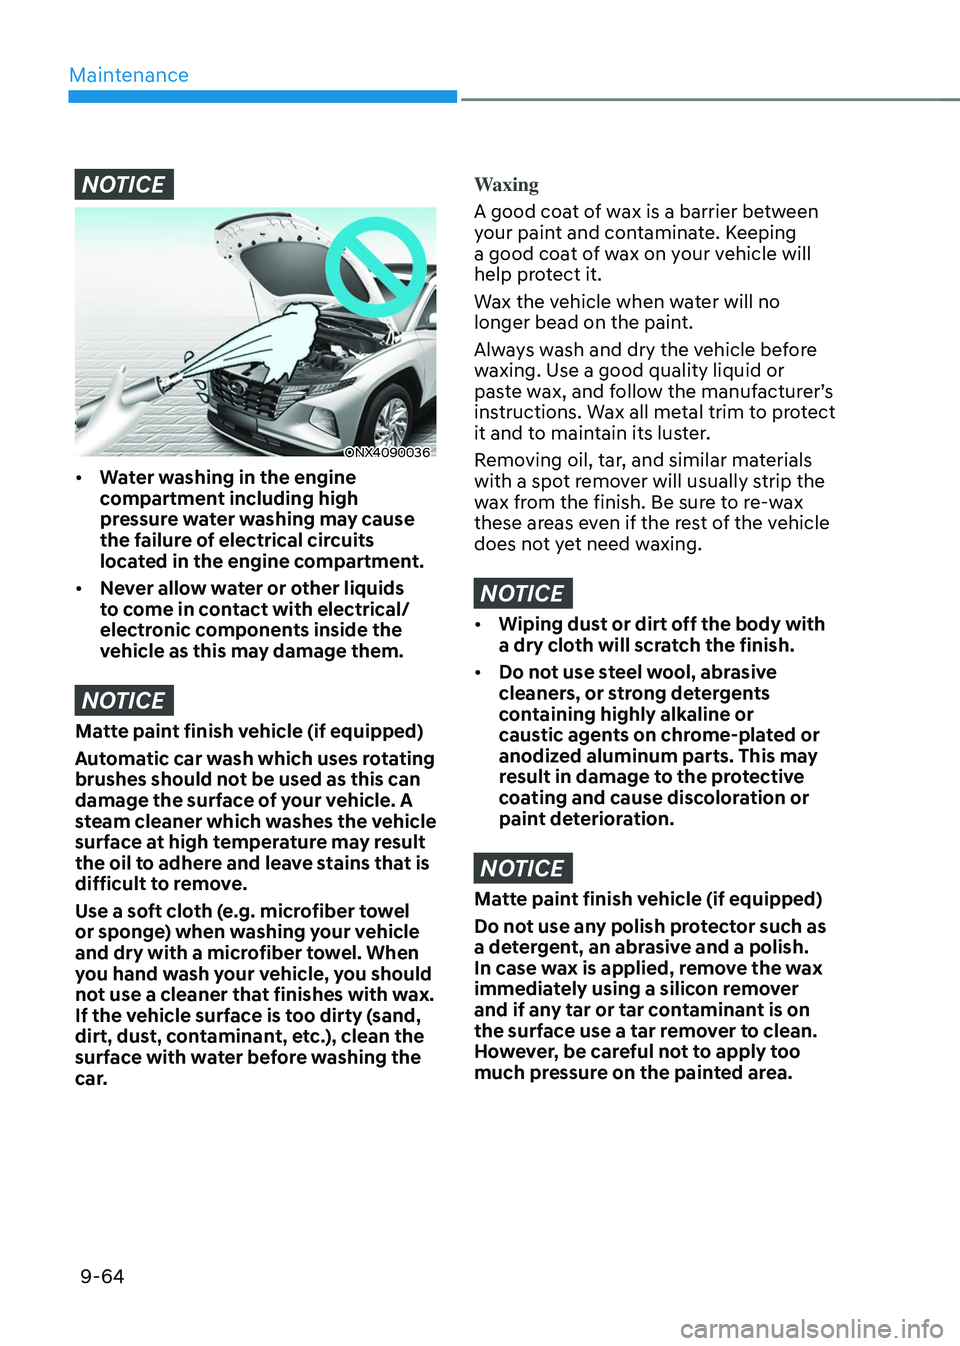 HYUNDAI TUCSON 2022  Owners Manual Maintenance
9-64
NOTICE
ONX4090036 
•	Water washing in the engine 
compartment including high 
pressure water washing may cause 
the failure of electrical circuits 
located in the engine compartment